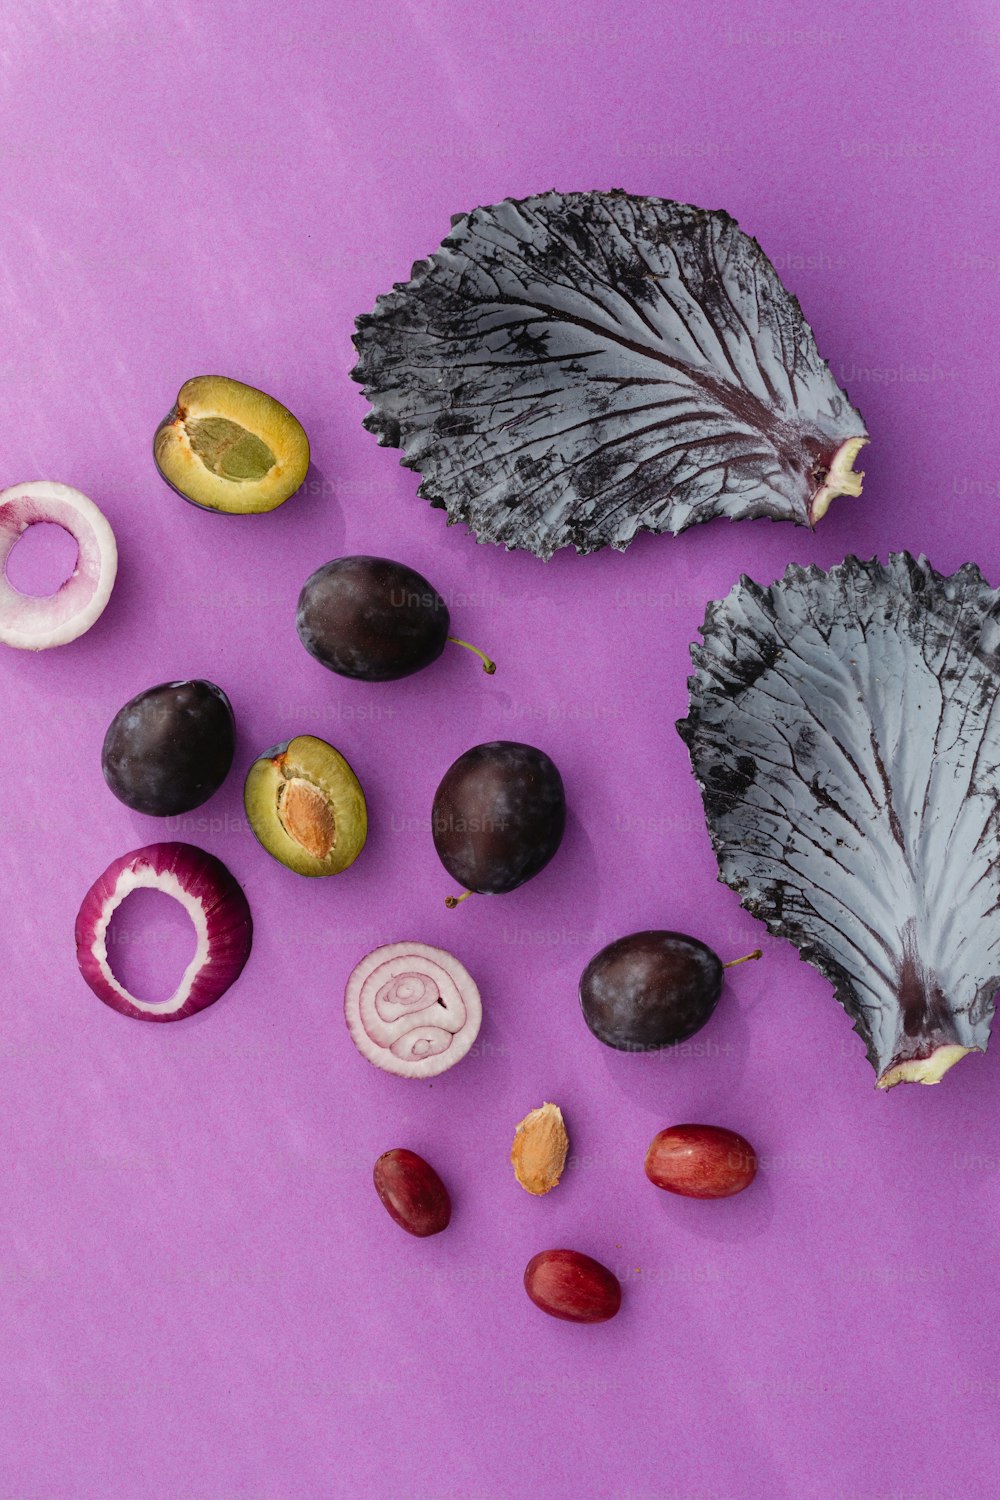 an assortment of fruits and vegetables on a purple surface